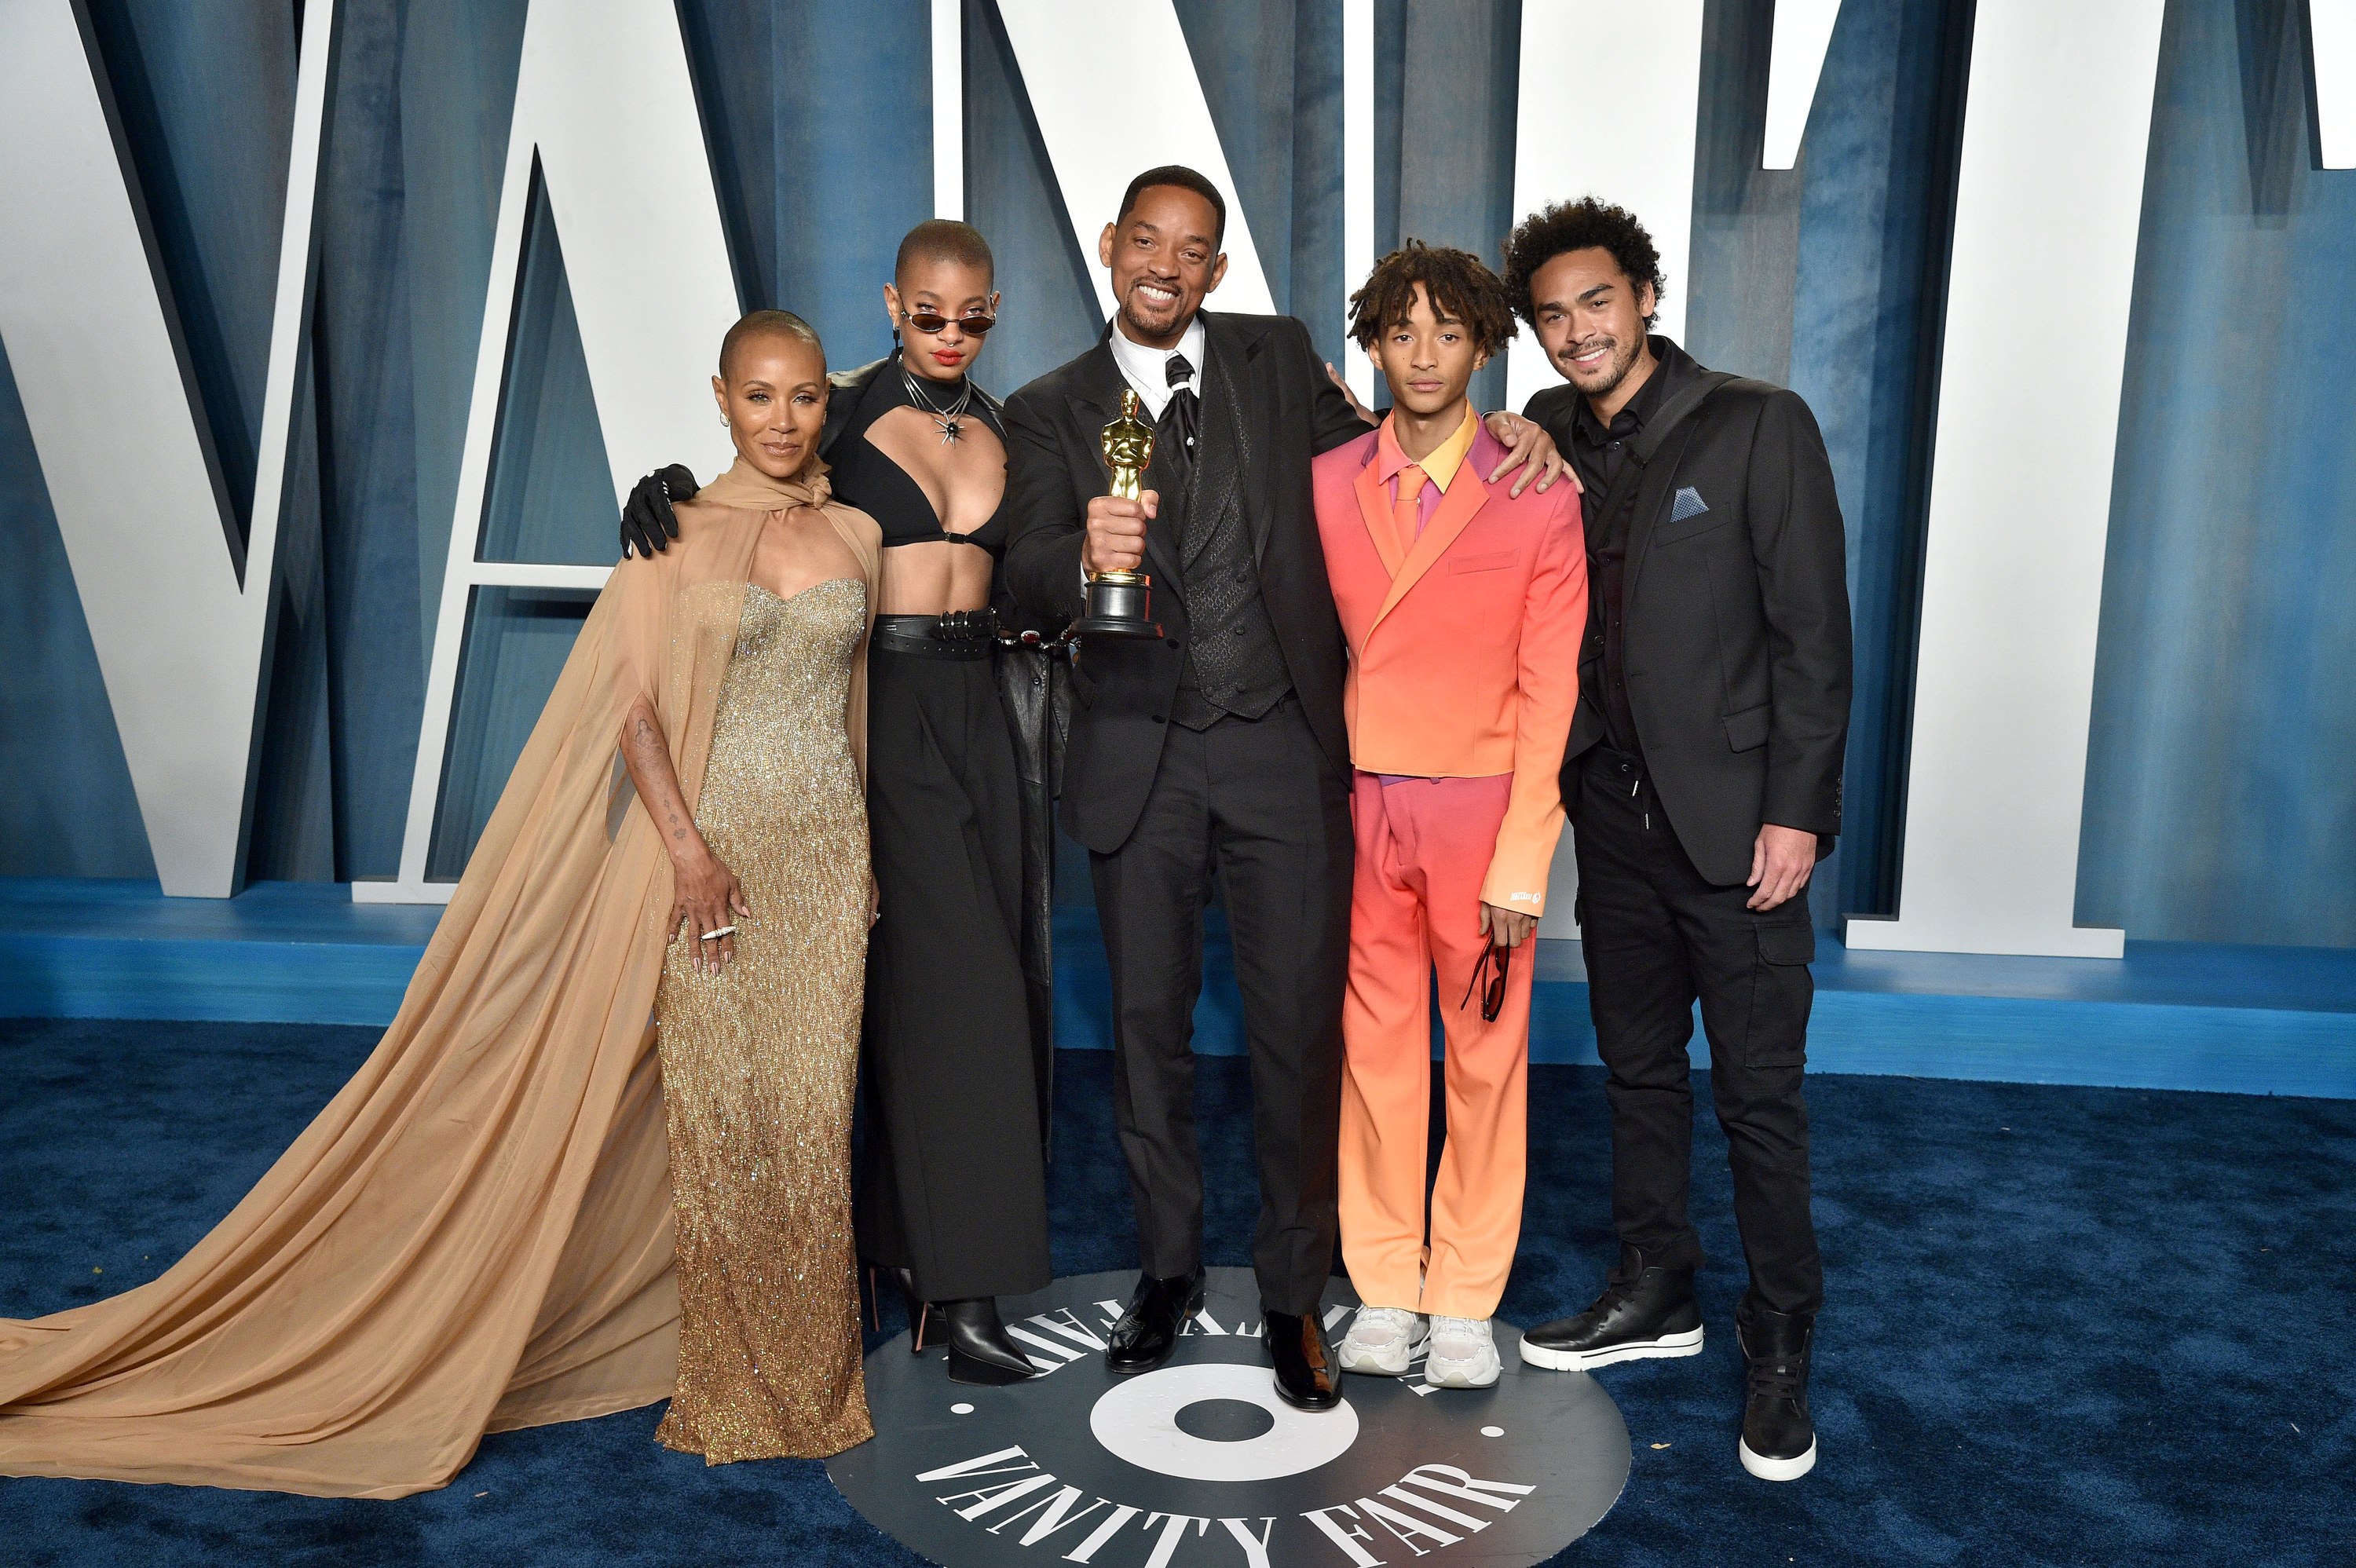 The Smith family pose for Vanity Fair after the awards